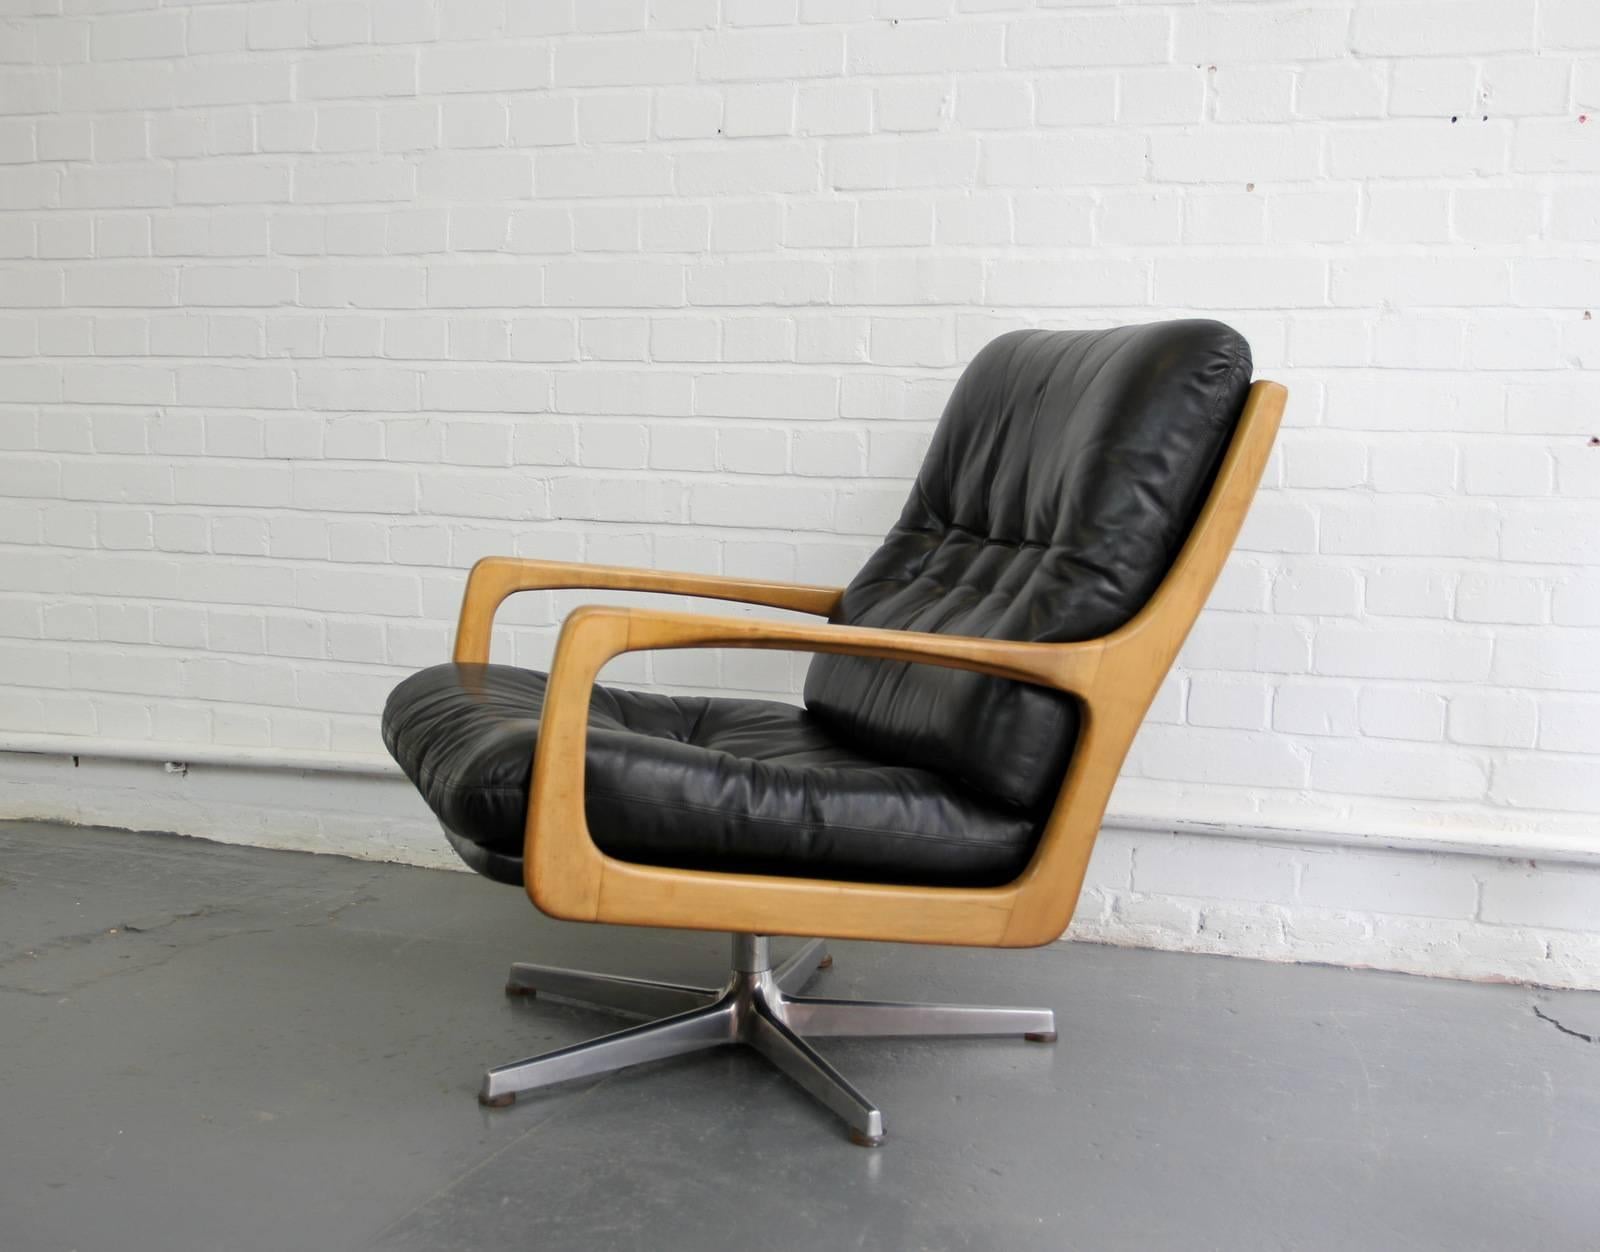 Midcentury lounge chair by Eugen Schmidt, circa 1960s.

- Black leather button back
- Beautifully shaped Beech arms
- Turns 360
- Designed by Eugen Schmidt
- German, circa 1960s.
- Measures: 67cm wide x 86cm tall x 80cm deep
- 40cm from the